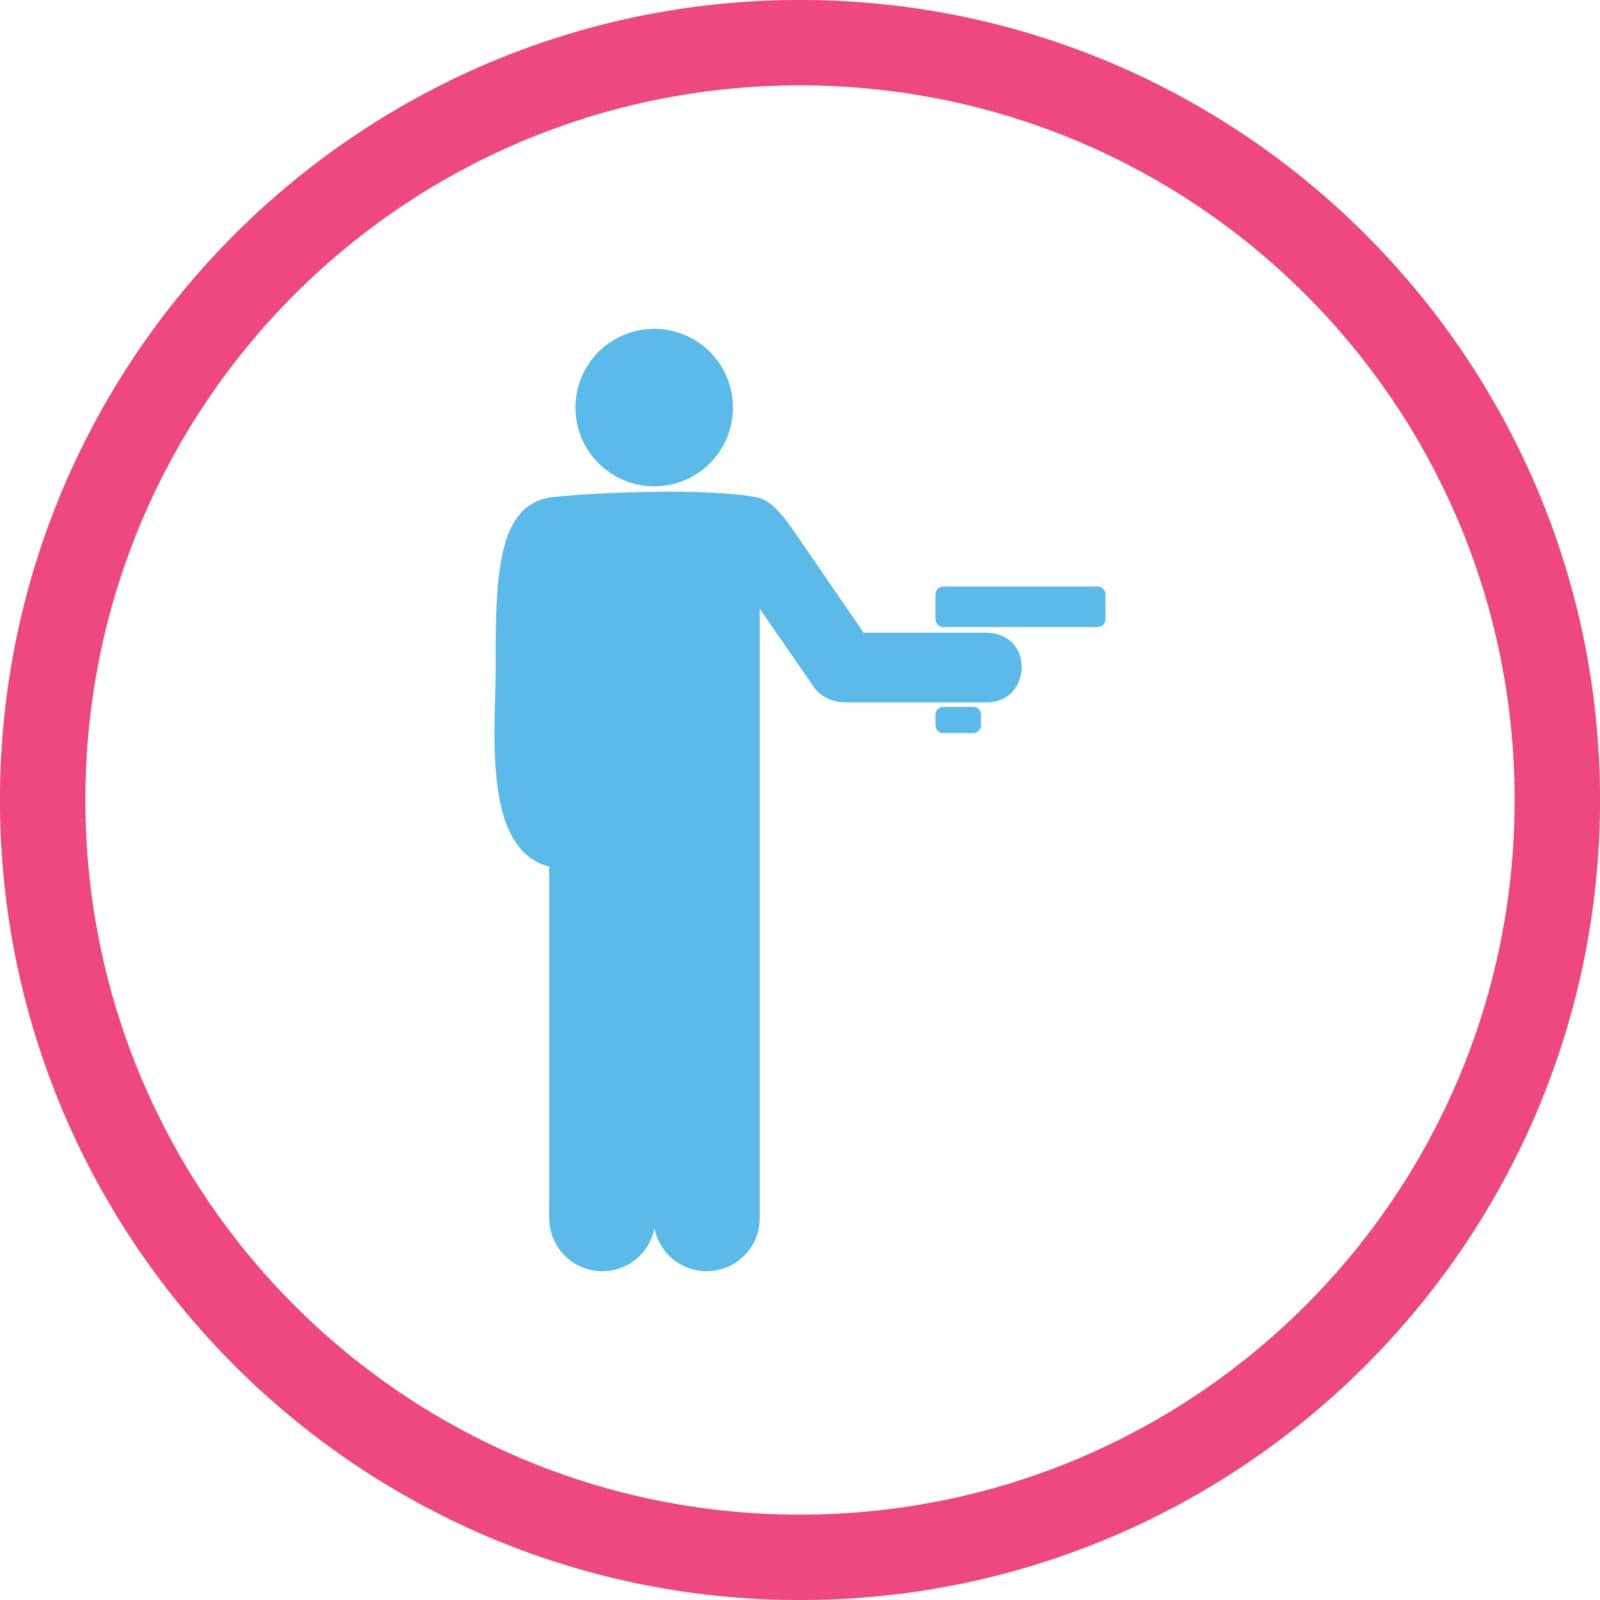 Robbery vector icon. This rounded flat symbol is drawn with pink and blue colors on a white background.